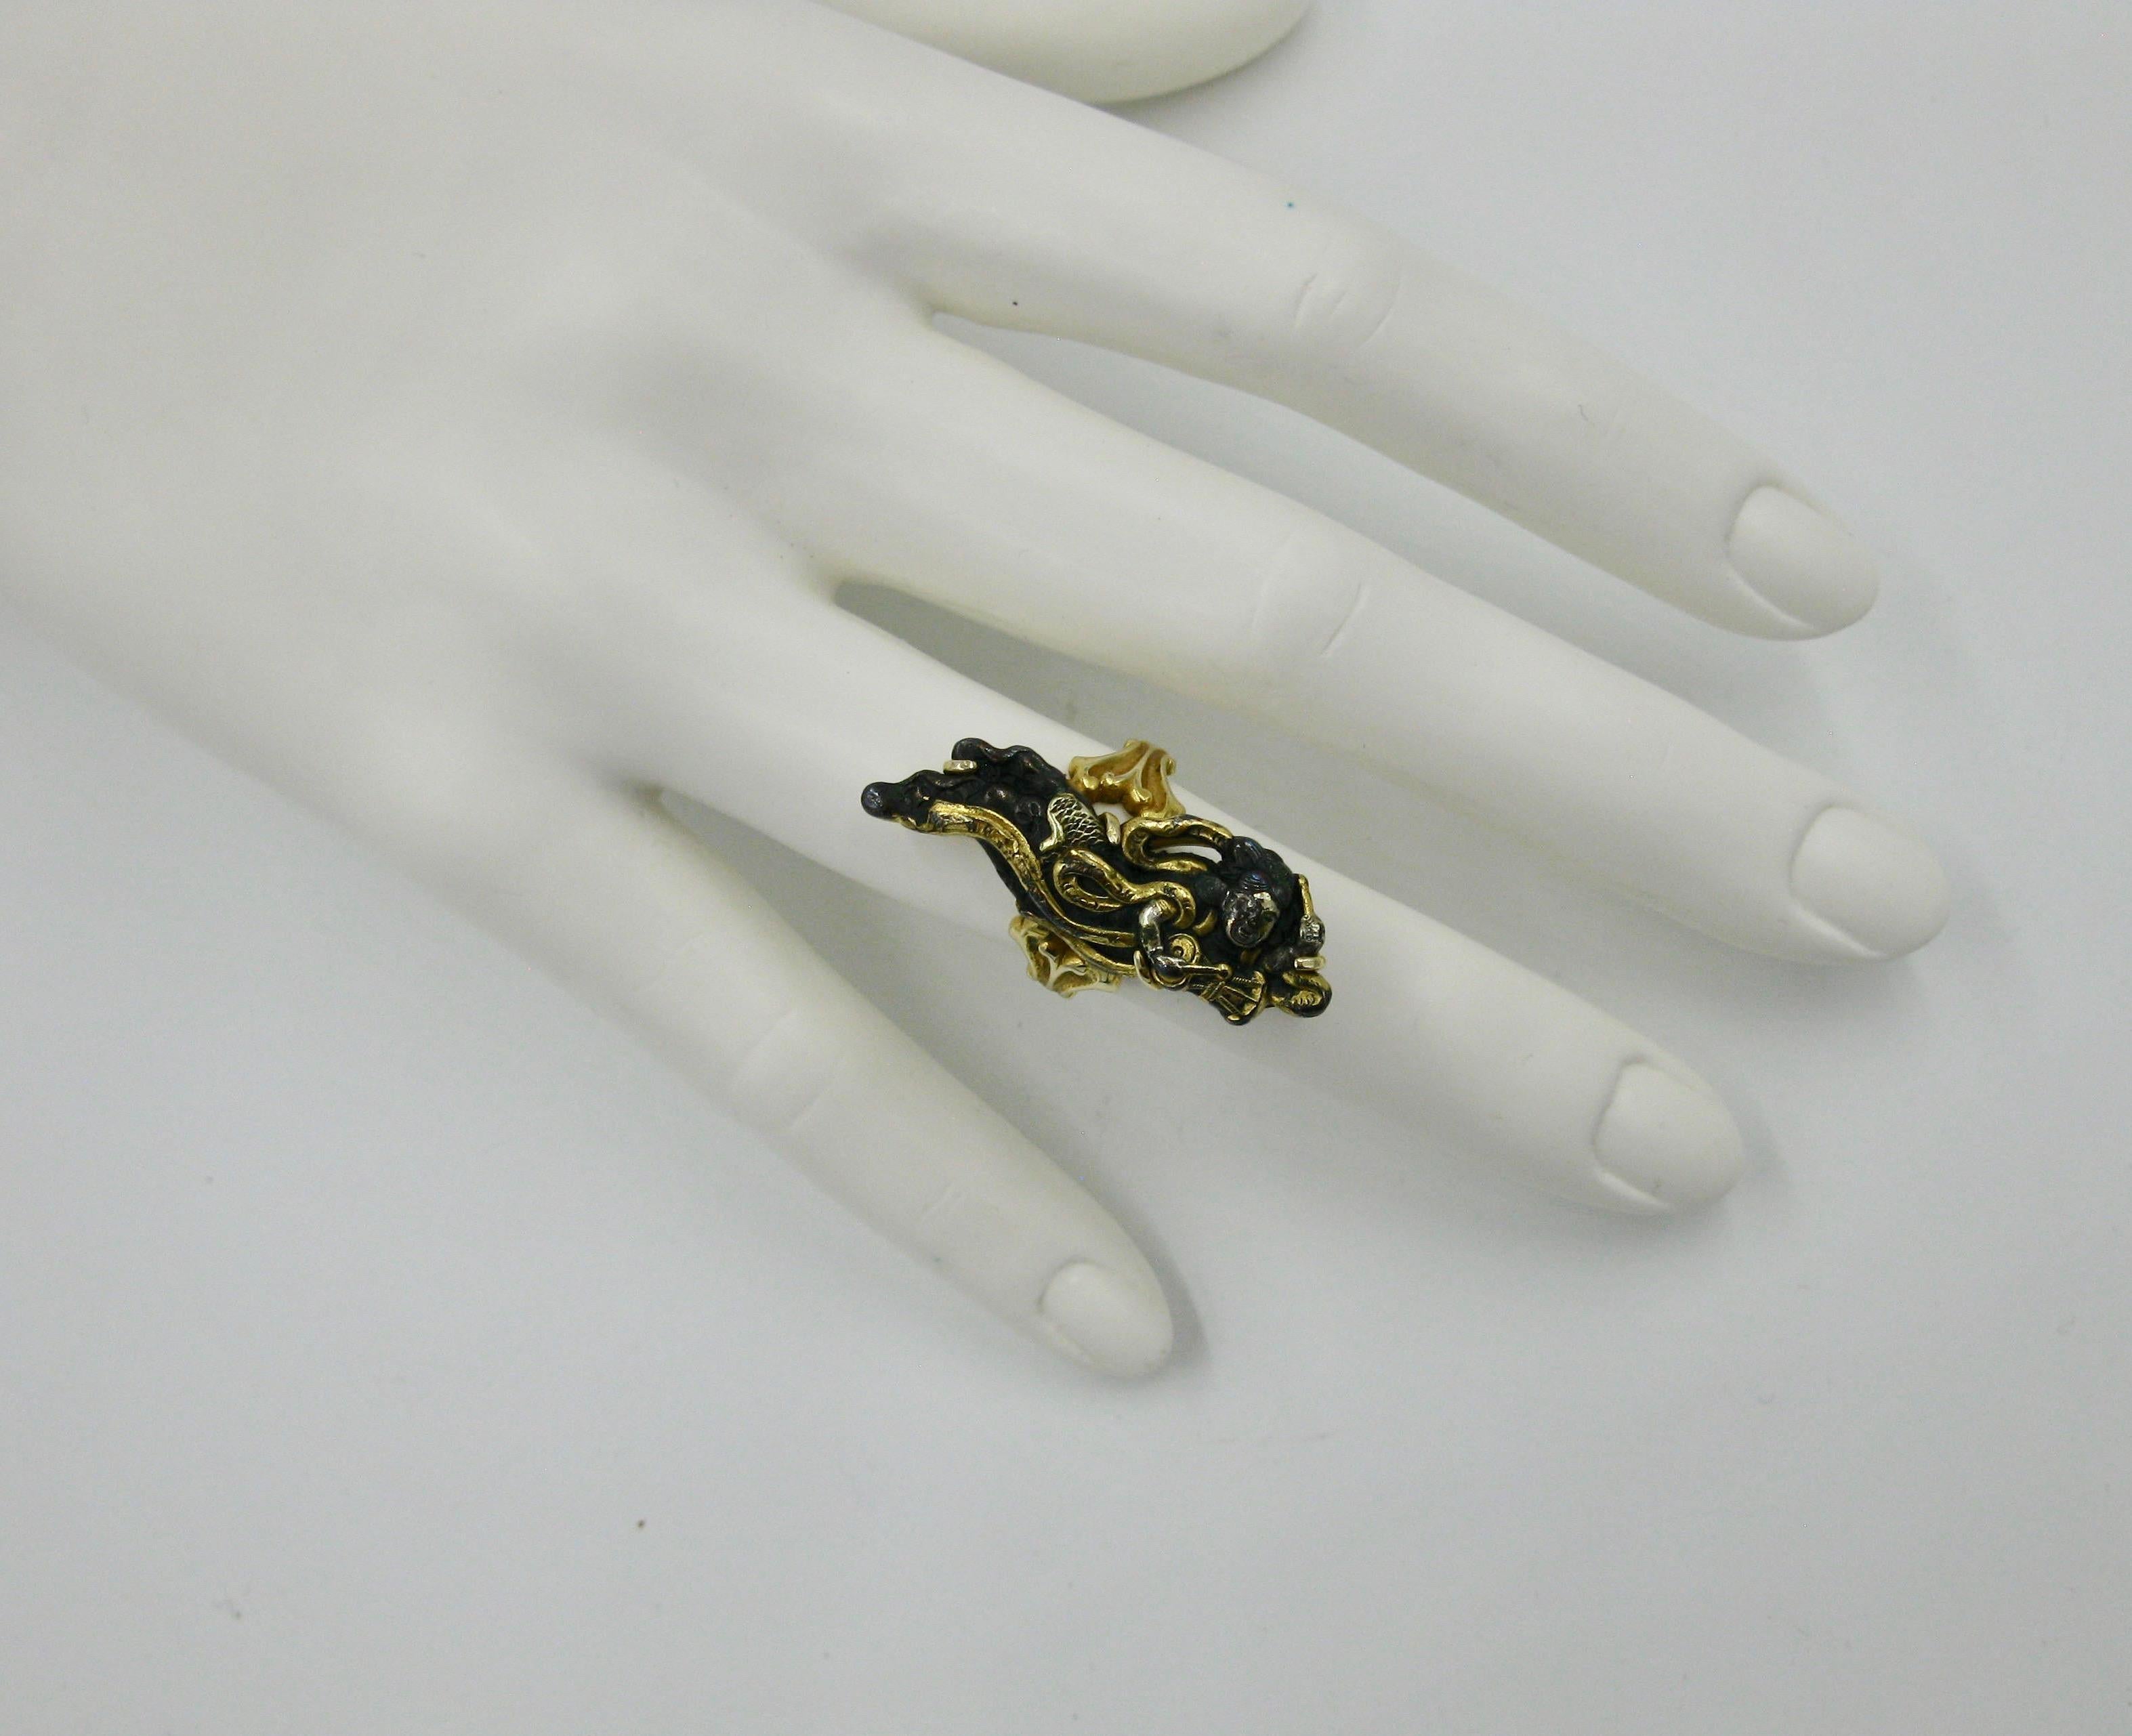 A very rare ring depicting a woman in flowing robes playing a musical instrument in the historic Japanese art form of Shakudo, in 14 Karat Gold.   The Shakudo pieces originated in the Samurai period in Japan and were created by esteemed artists who